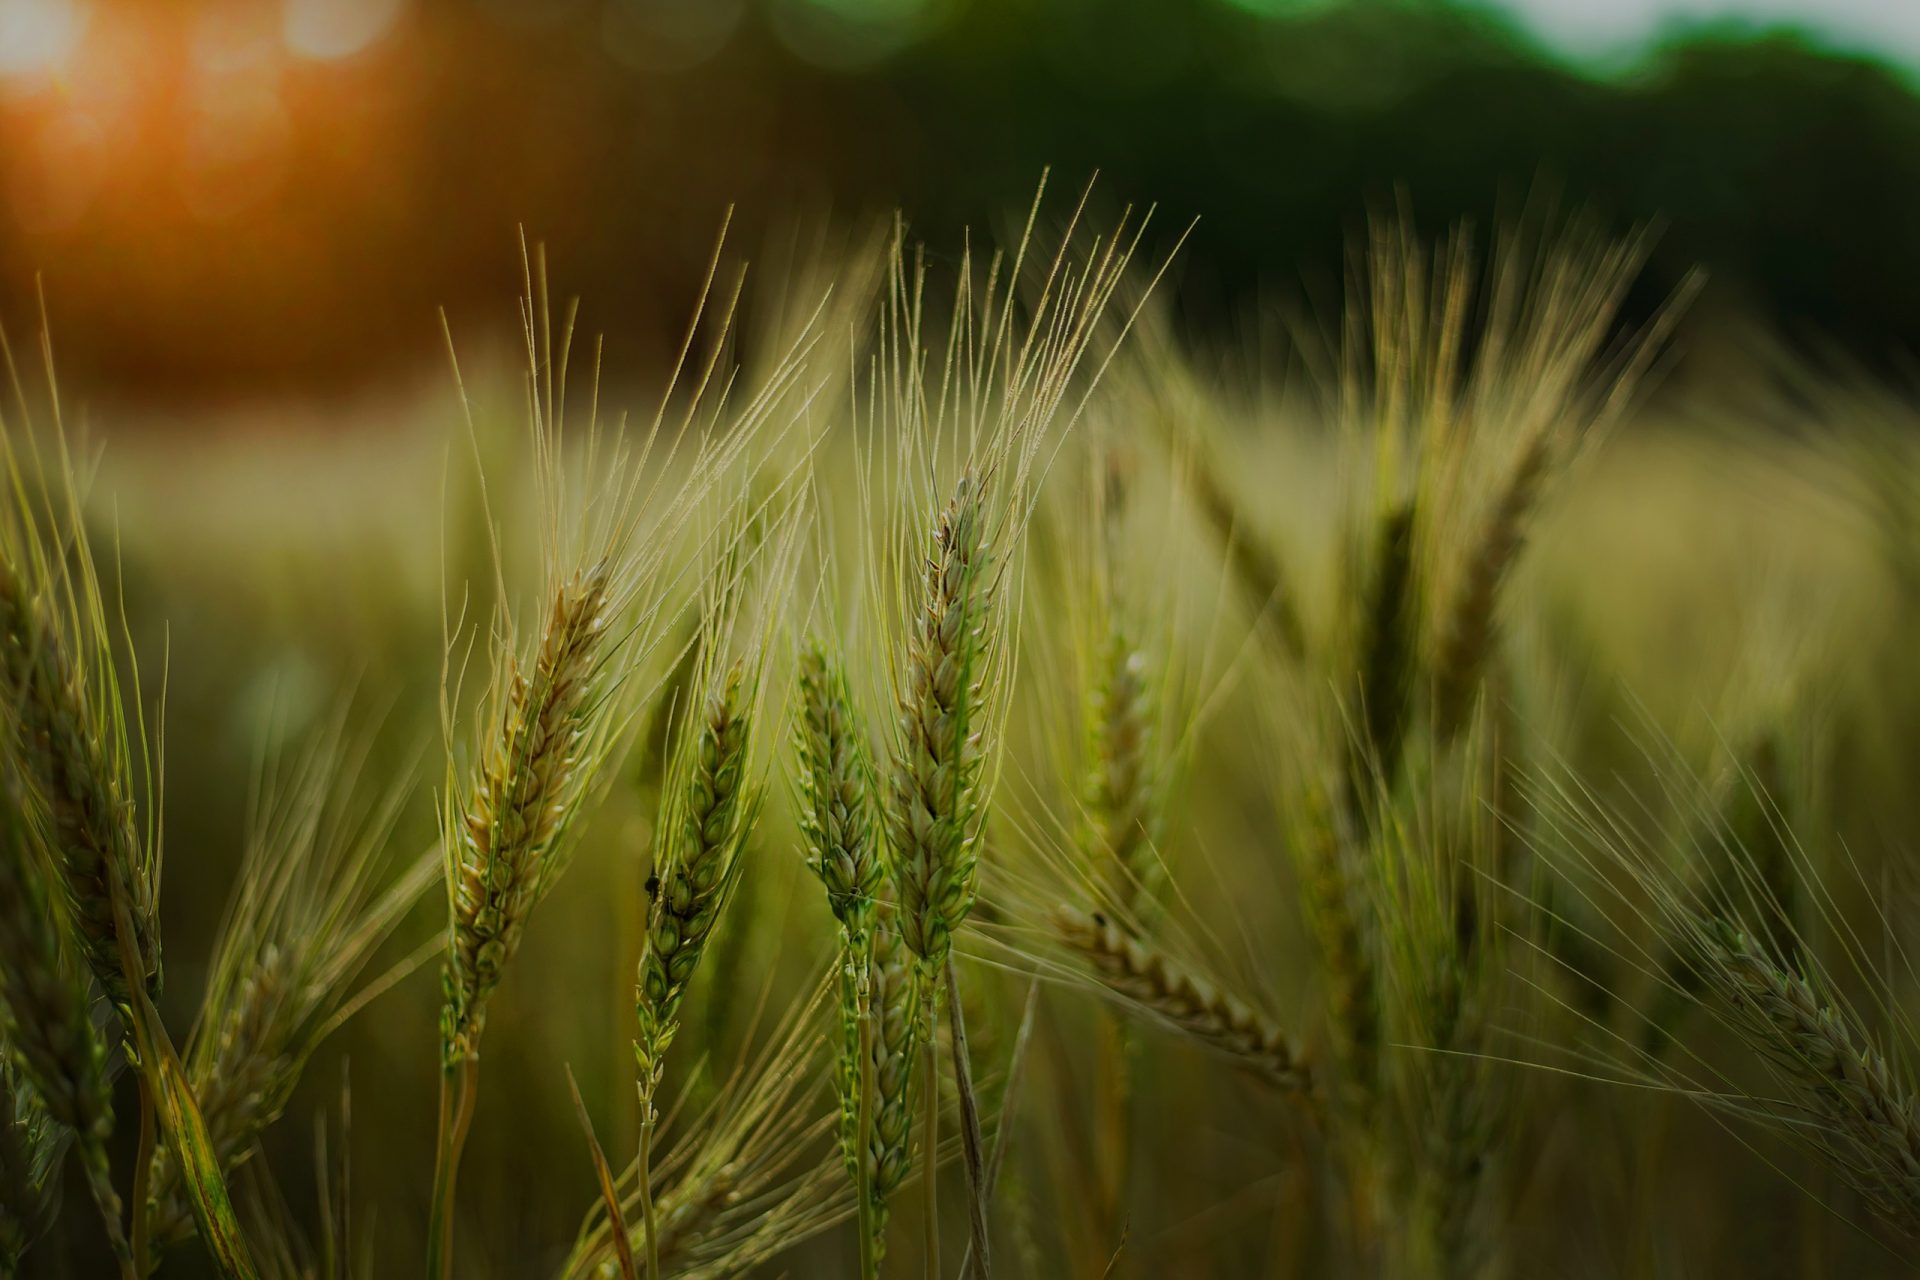 Selective focus shot of some wheat in a field